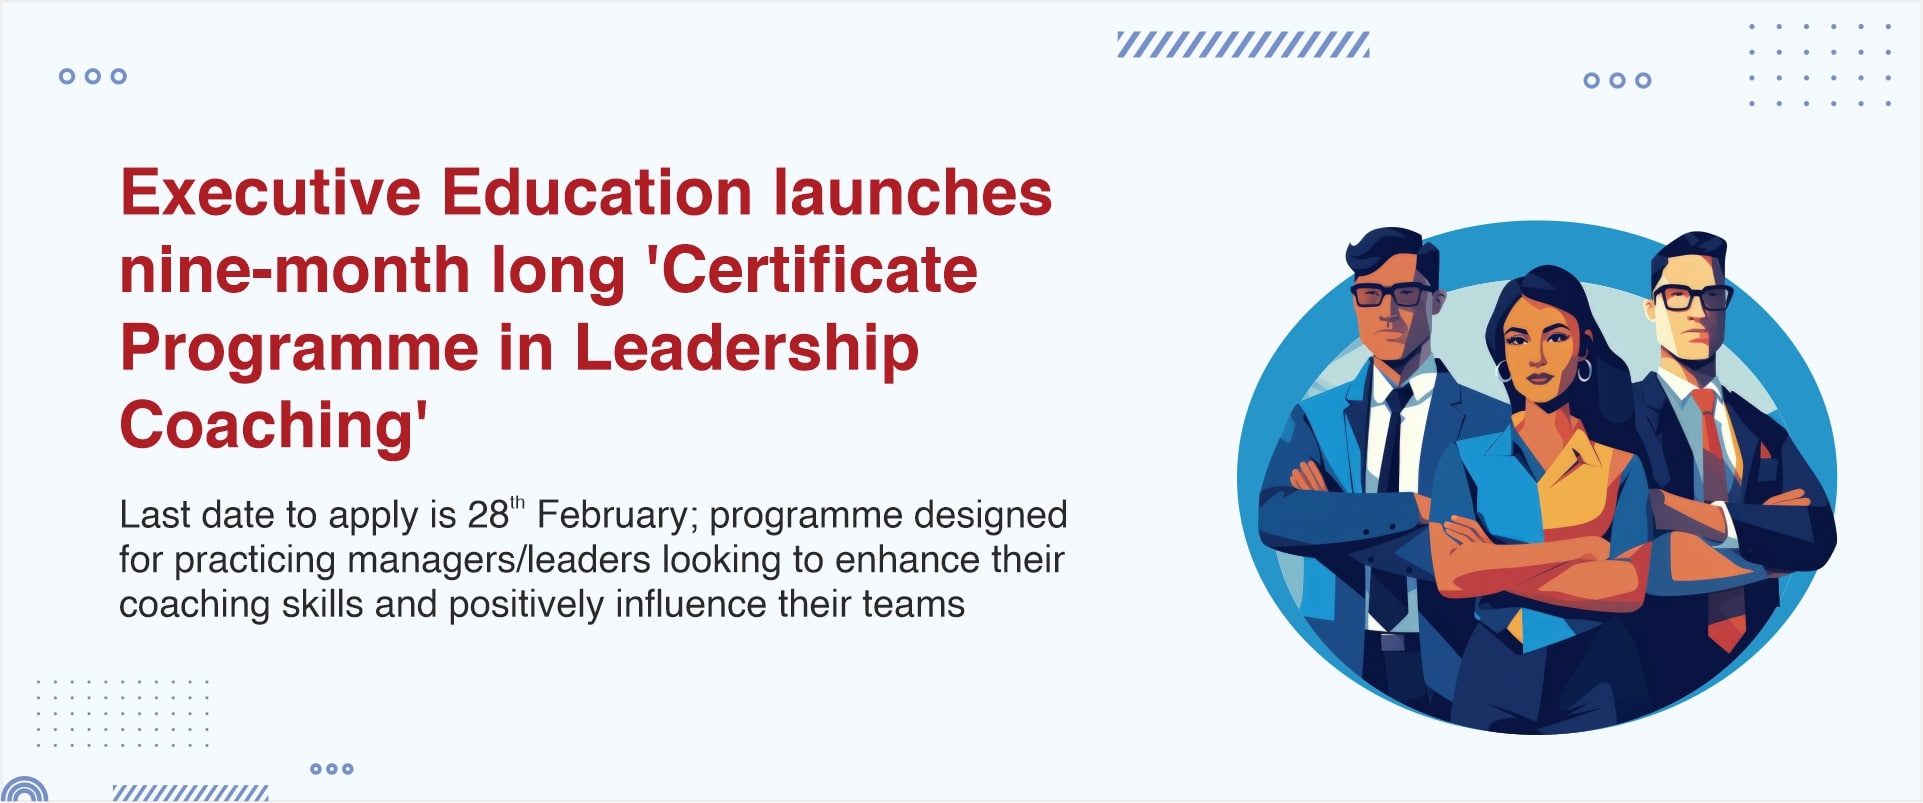 Executive Education launches nine-month long ‘Certificate Programme in Leadership Coaching’ 